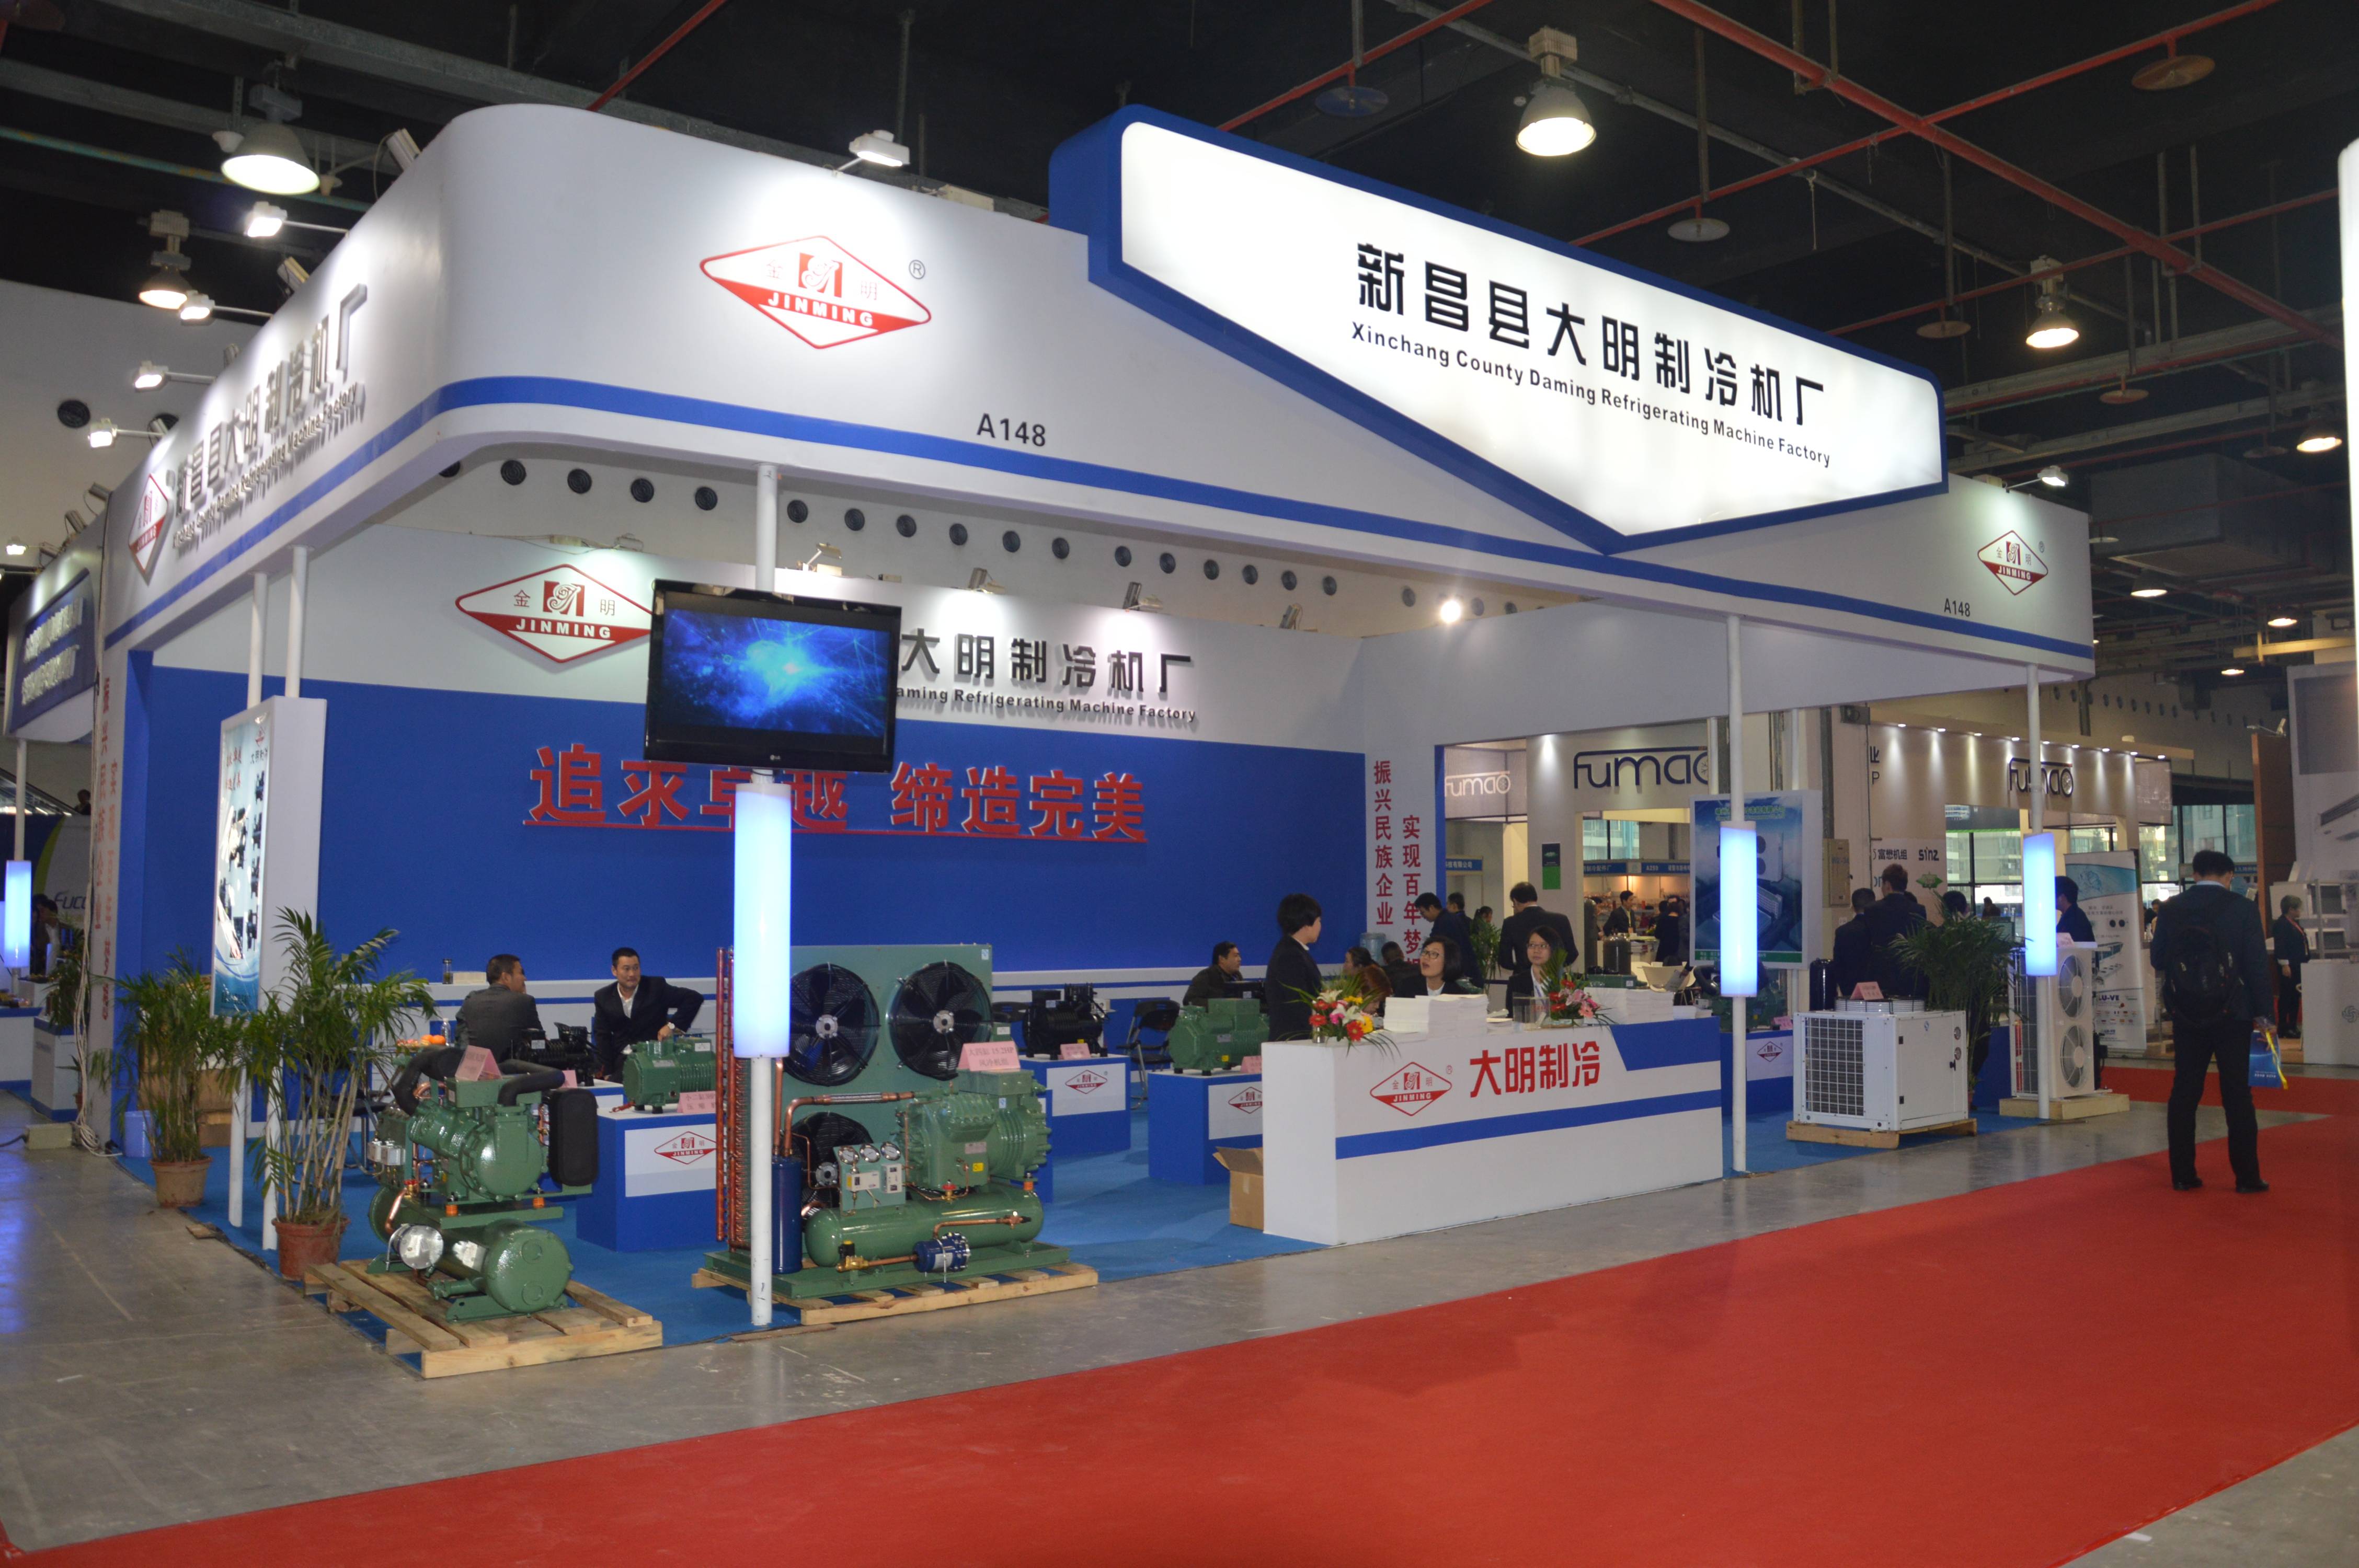 ZheJiang DaMing In 2017 HVACR EXPOSITION